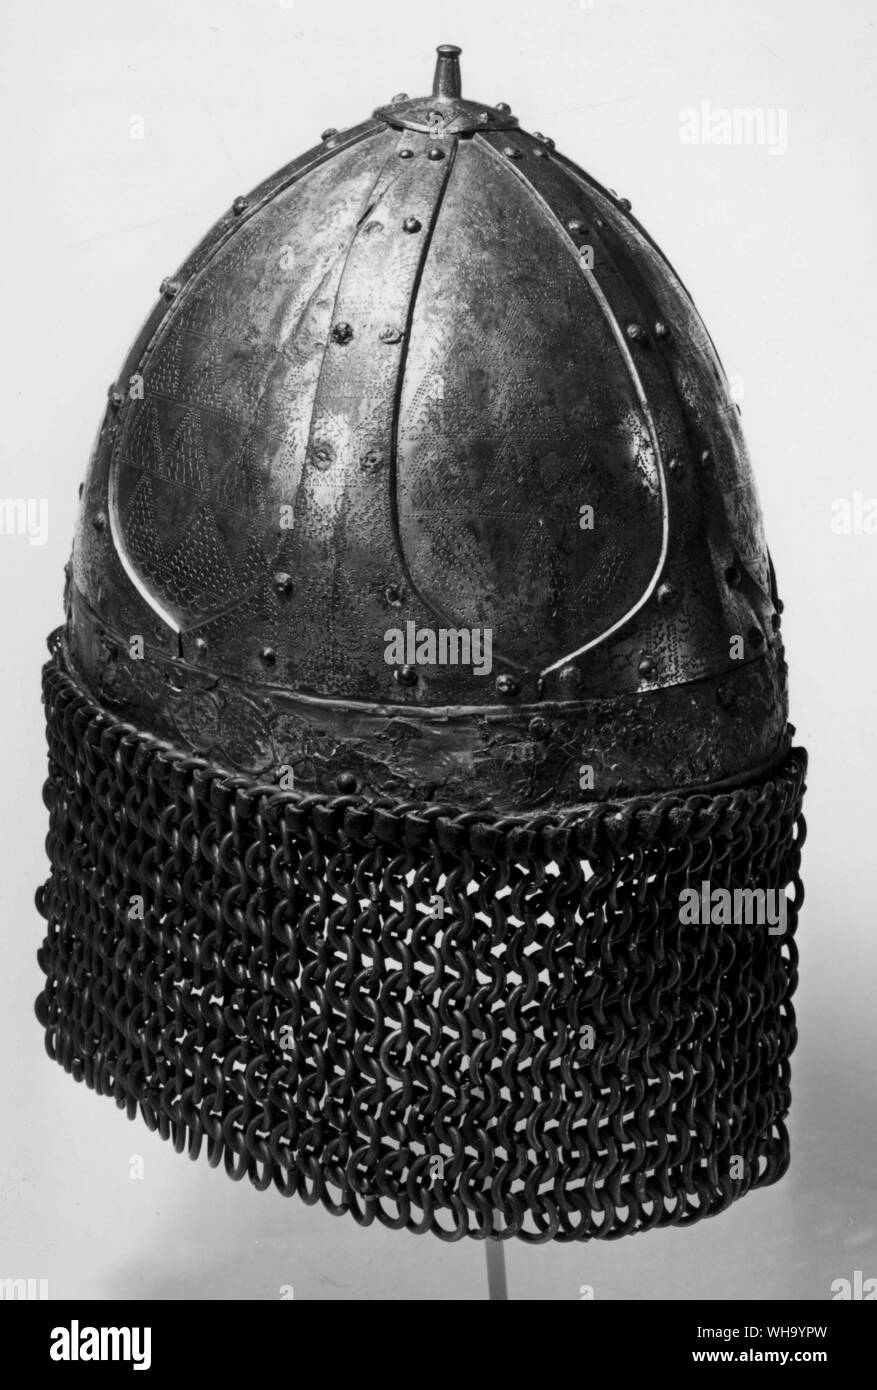 Helmet with chain mail. Possibly German in origin. Stock Photo